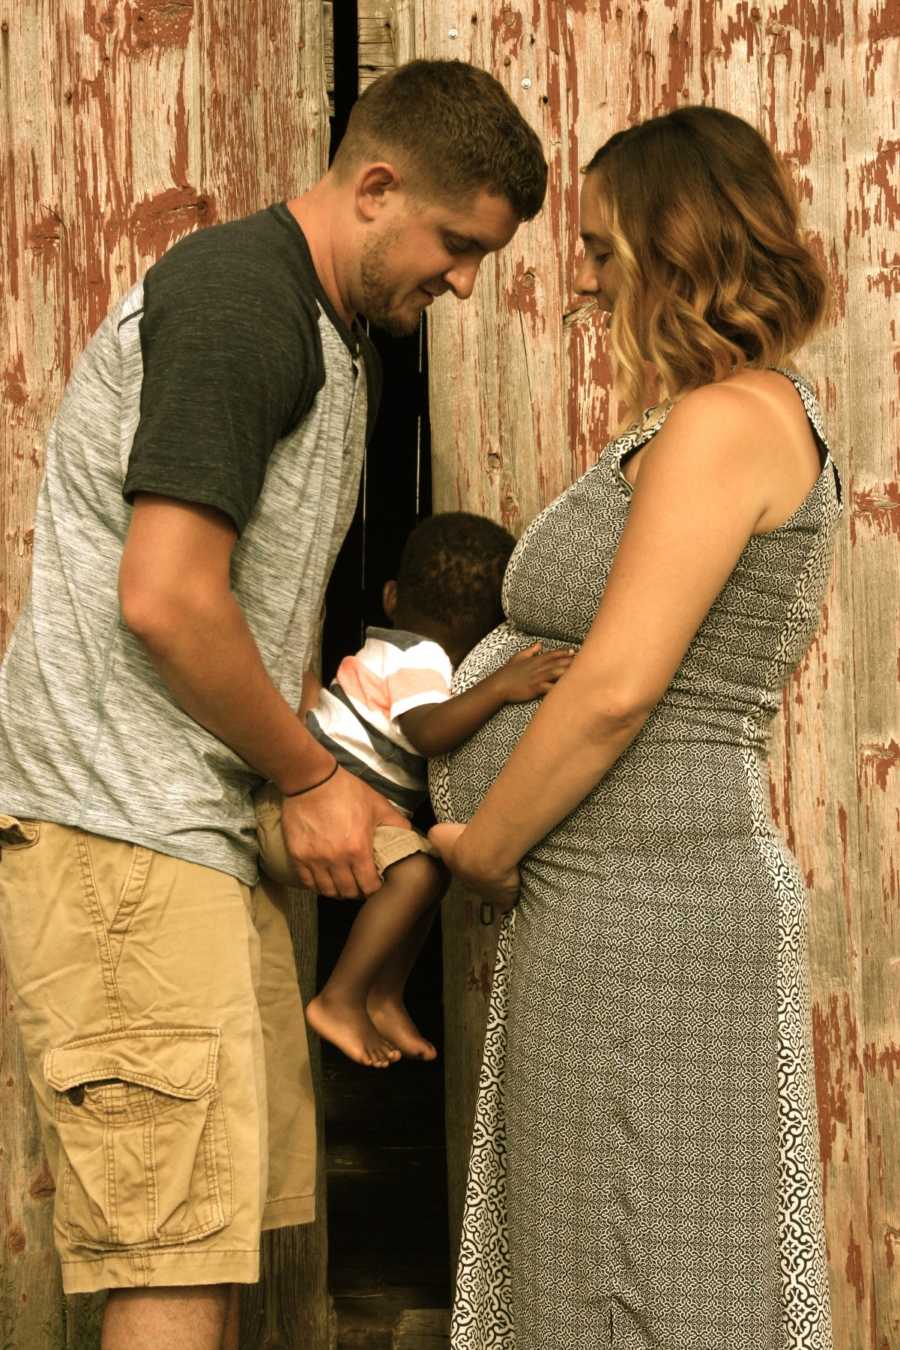 Father holds adopted son to pregnant wife's stomach while he wraps his arms around her